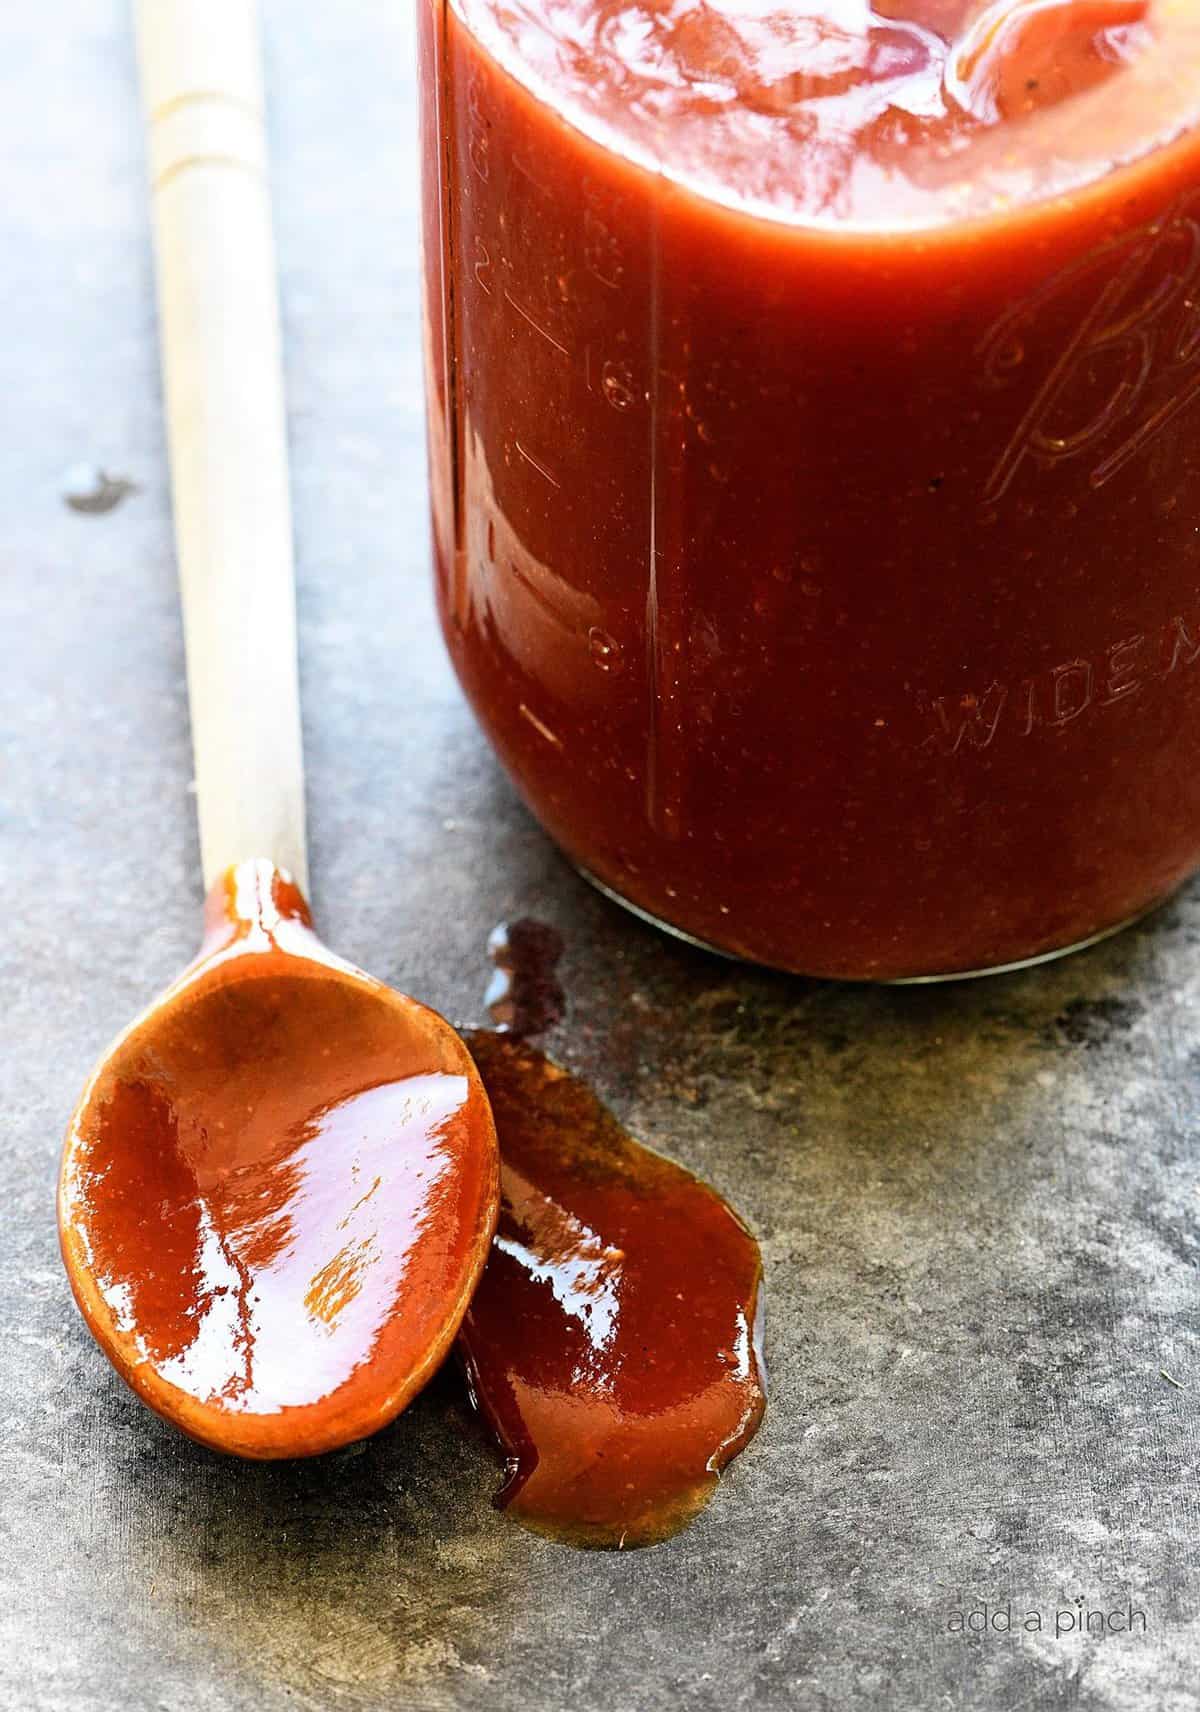  Brushing on the homemade Sugar Shack Barbecue Sauce to add flavor to grilled chicken